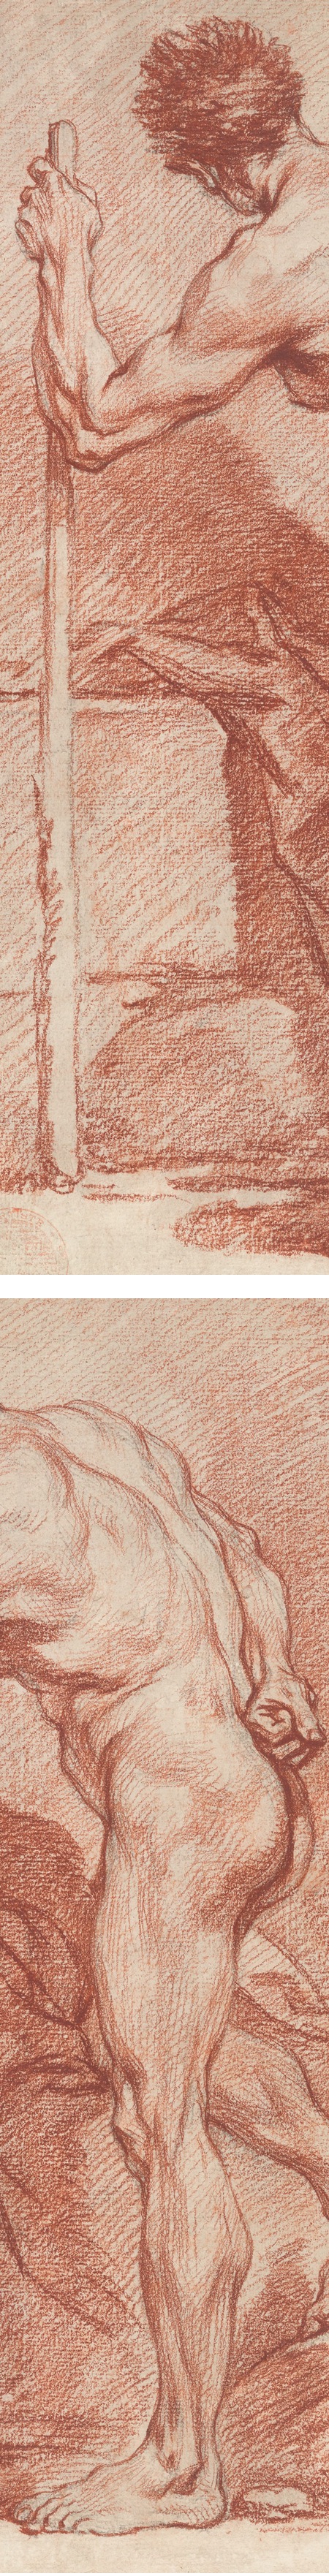 Francois Boucher chalk drawing of a male nude figure (details)